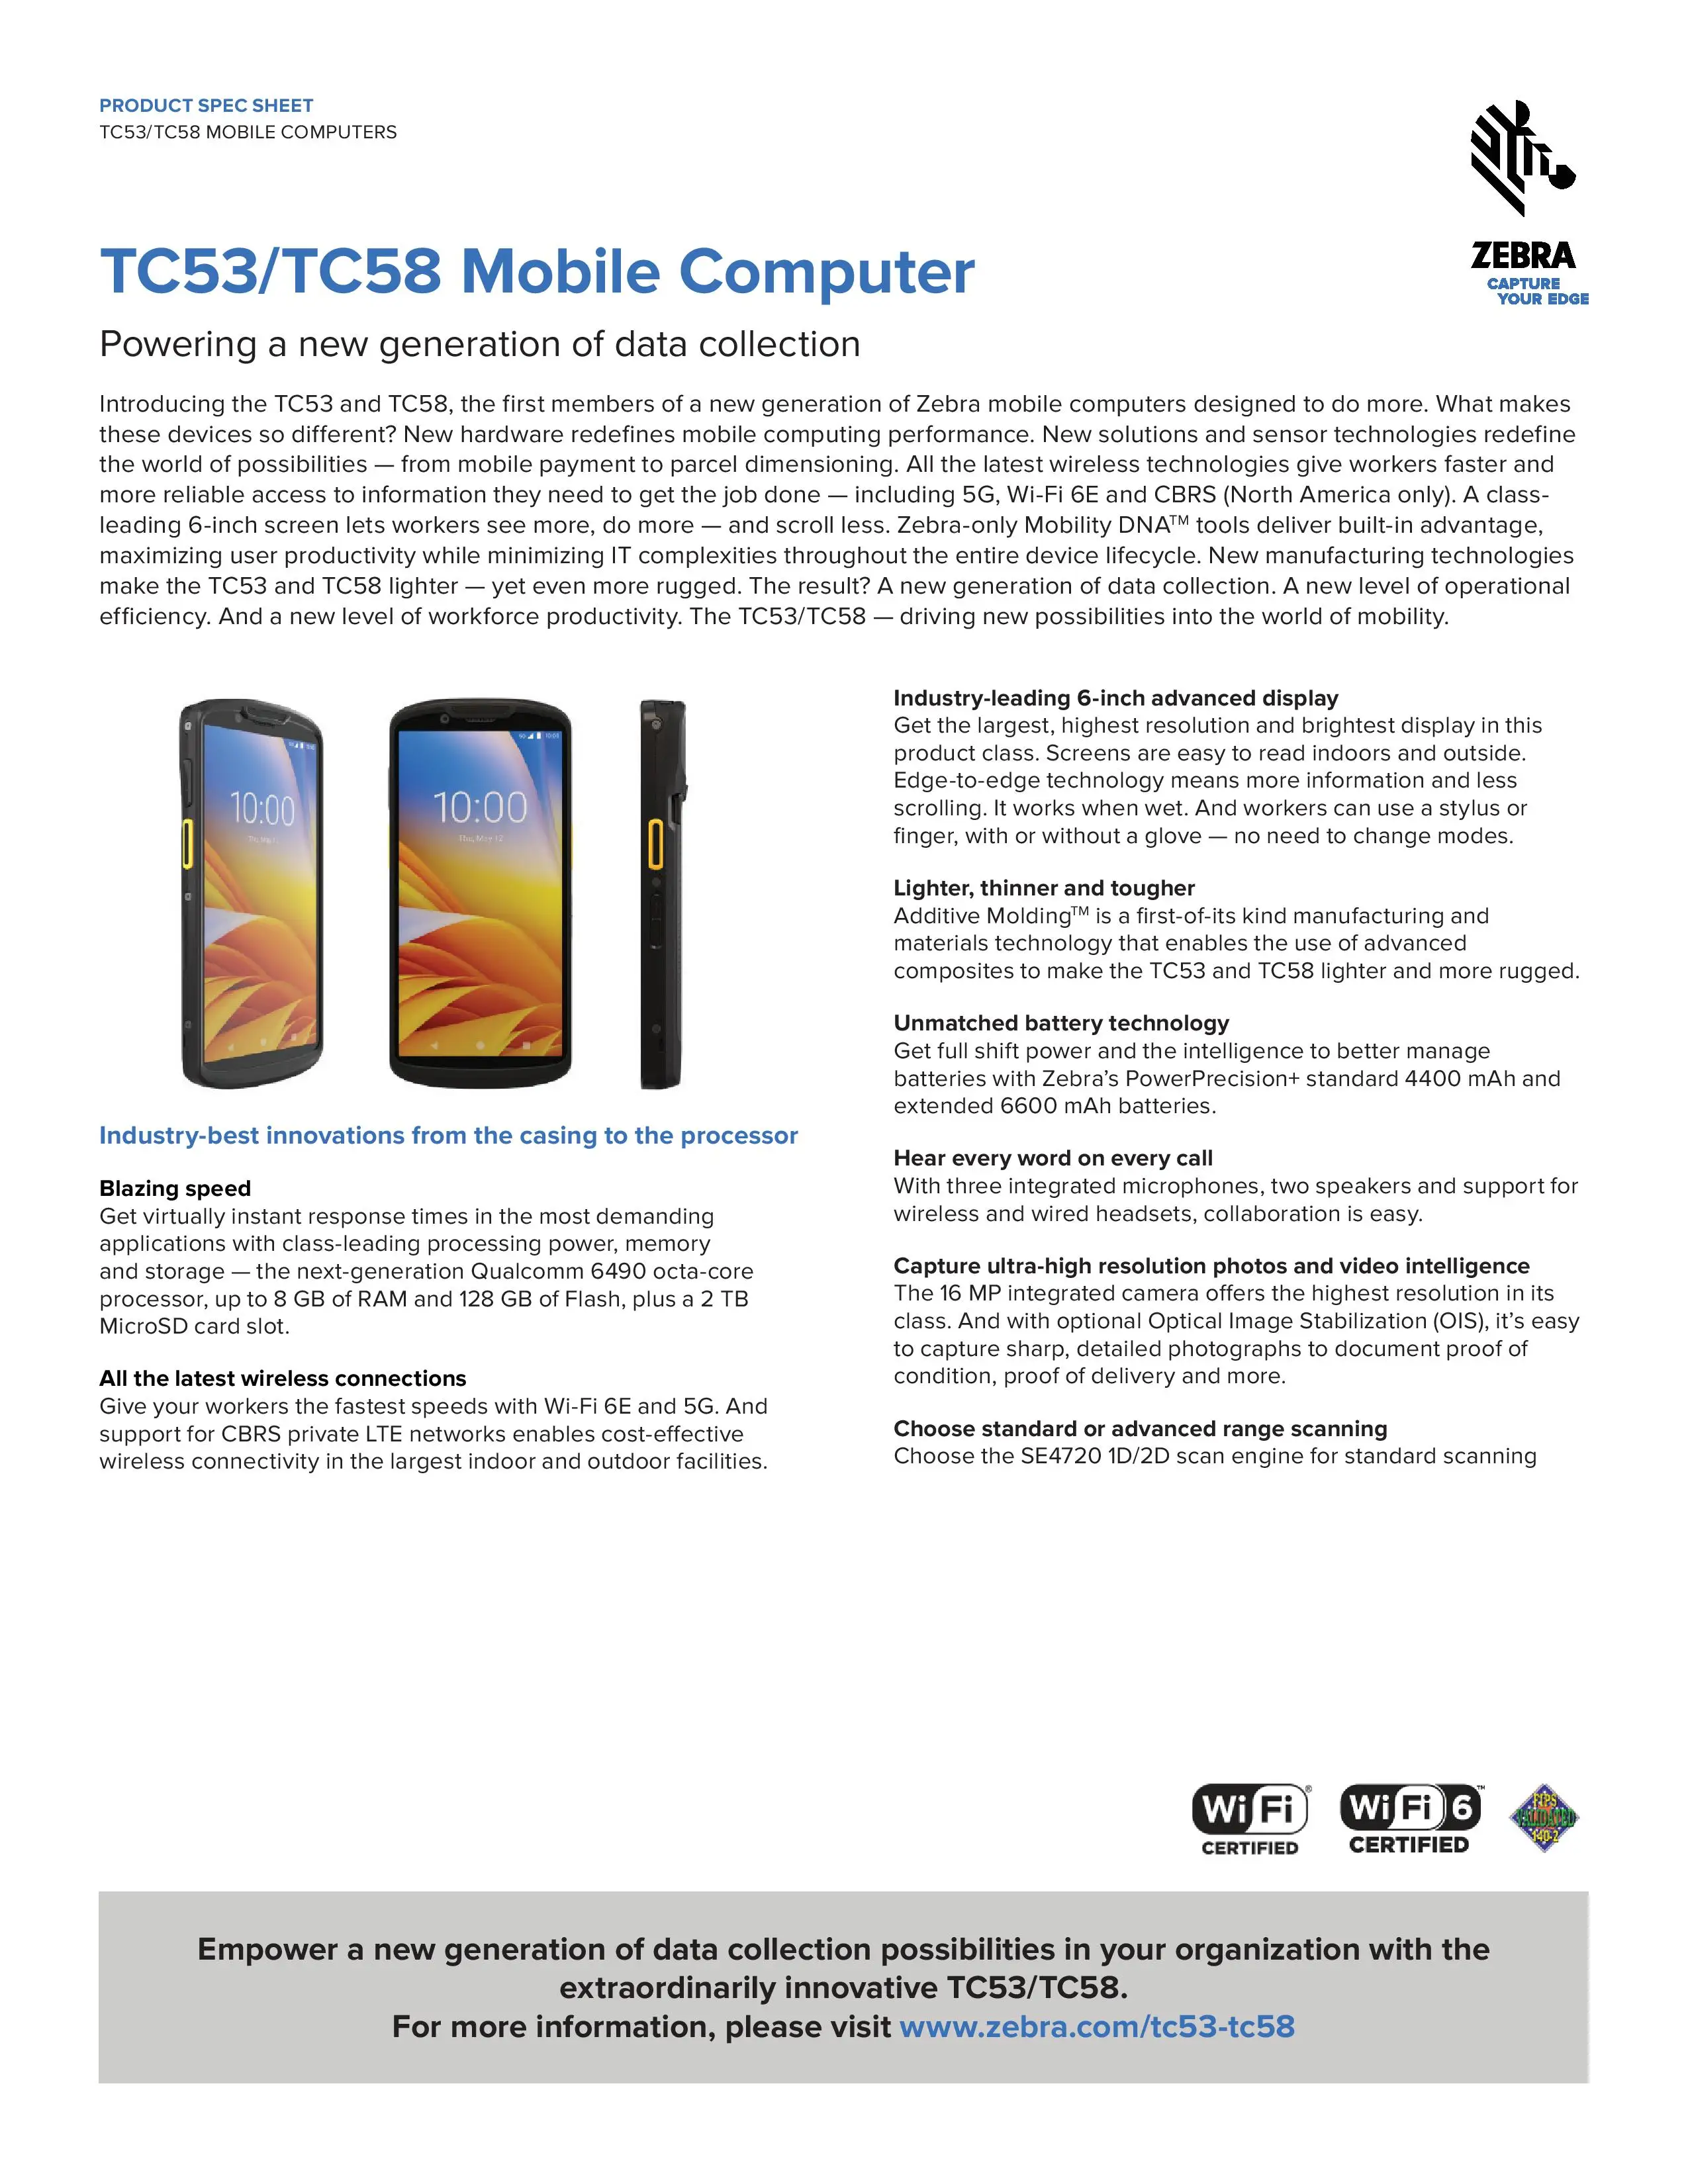 NEW!!! Zebra TC58 - The new generation of Android mobile computers with Wi-Fi 6E, 5G and PPT function